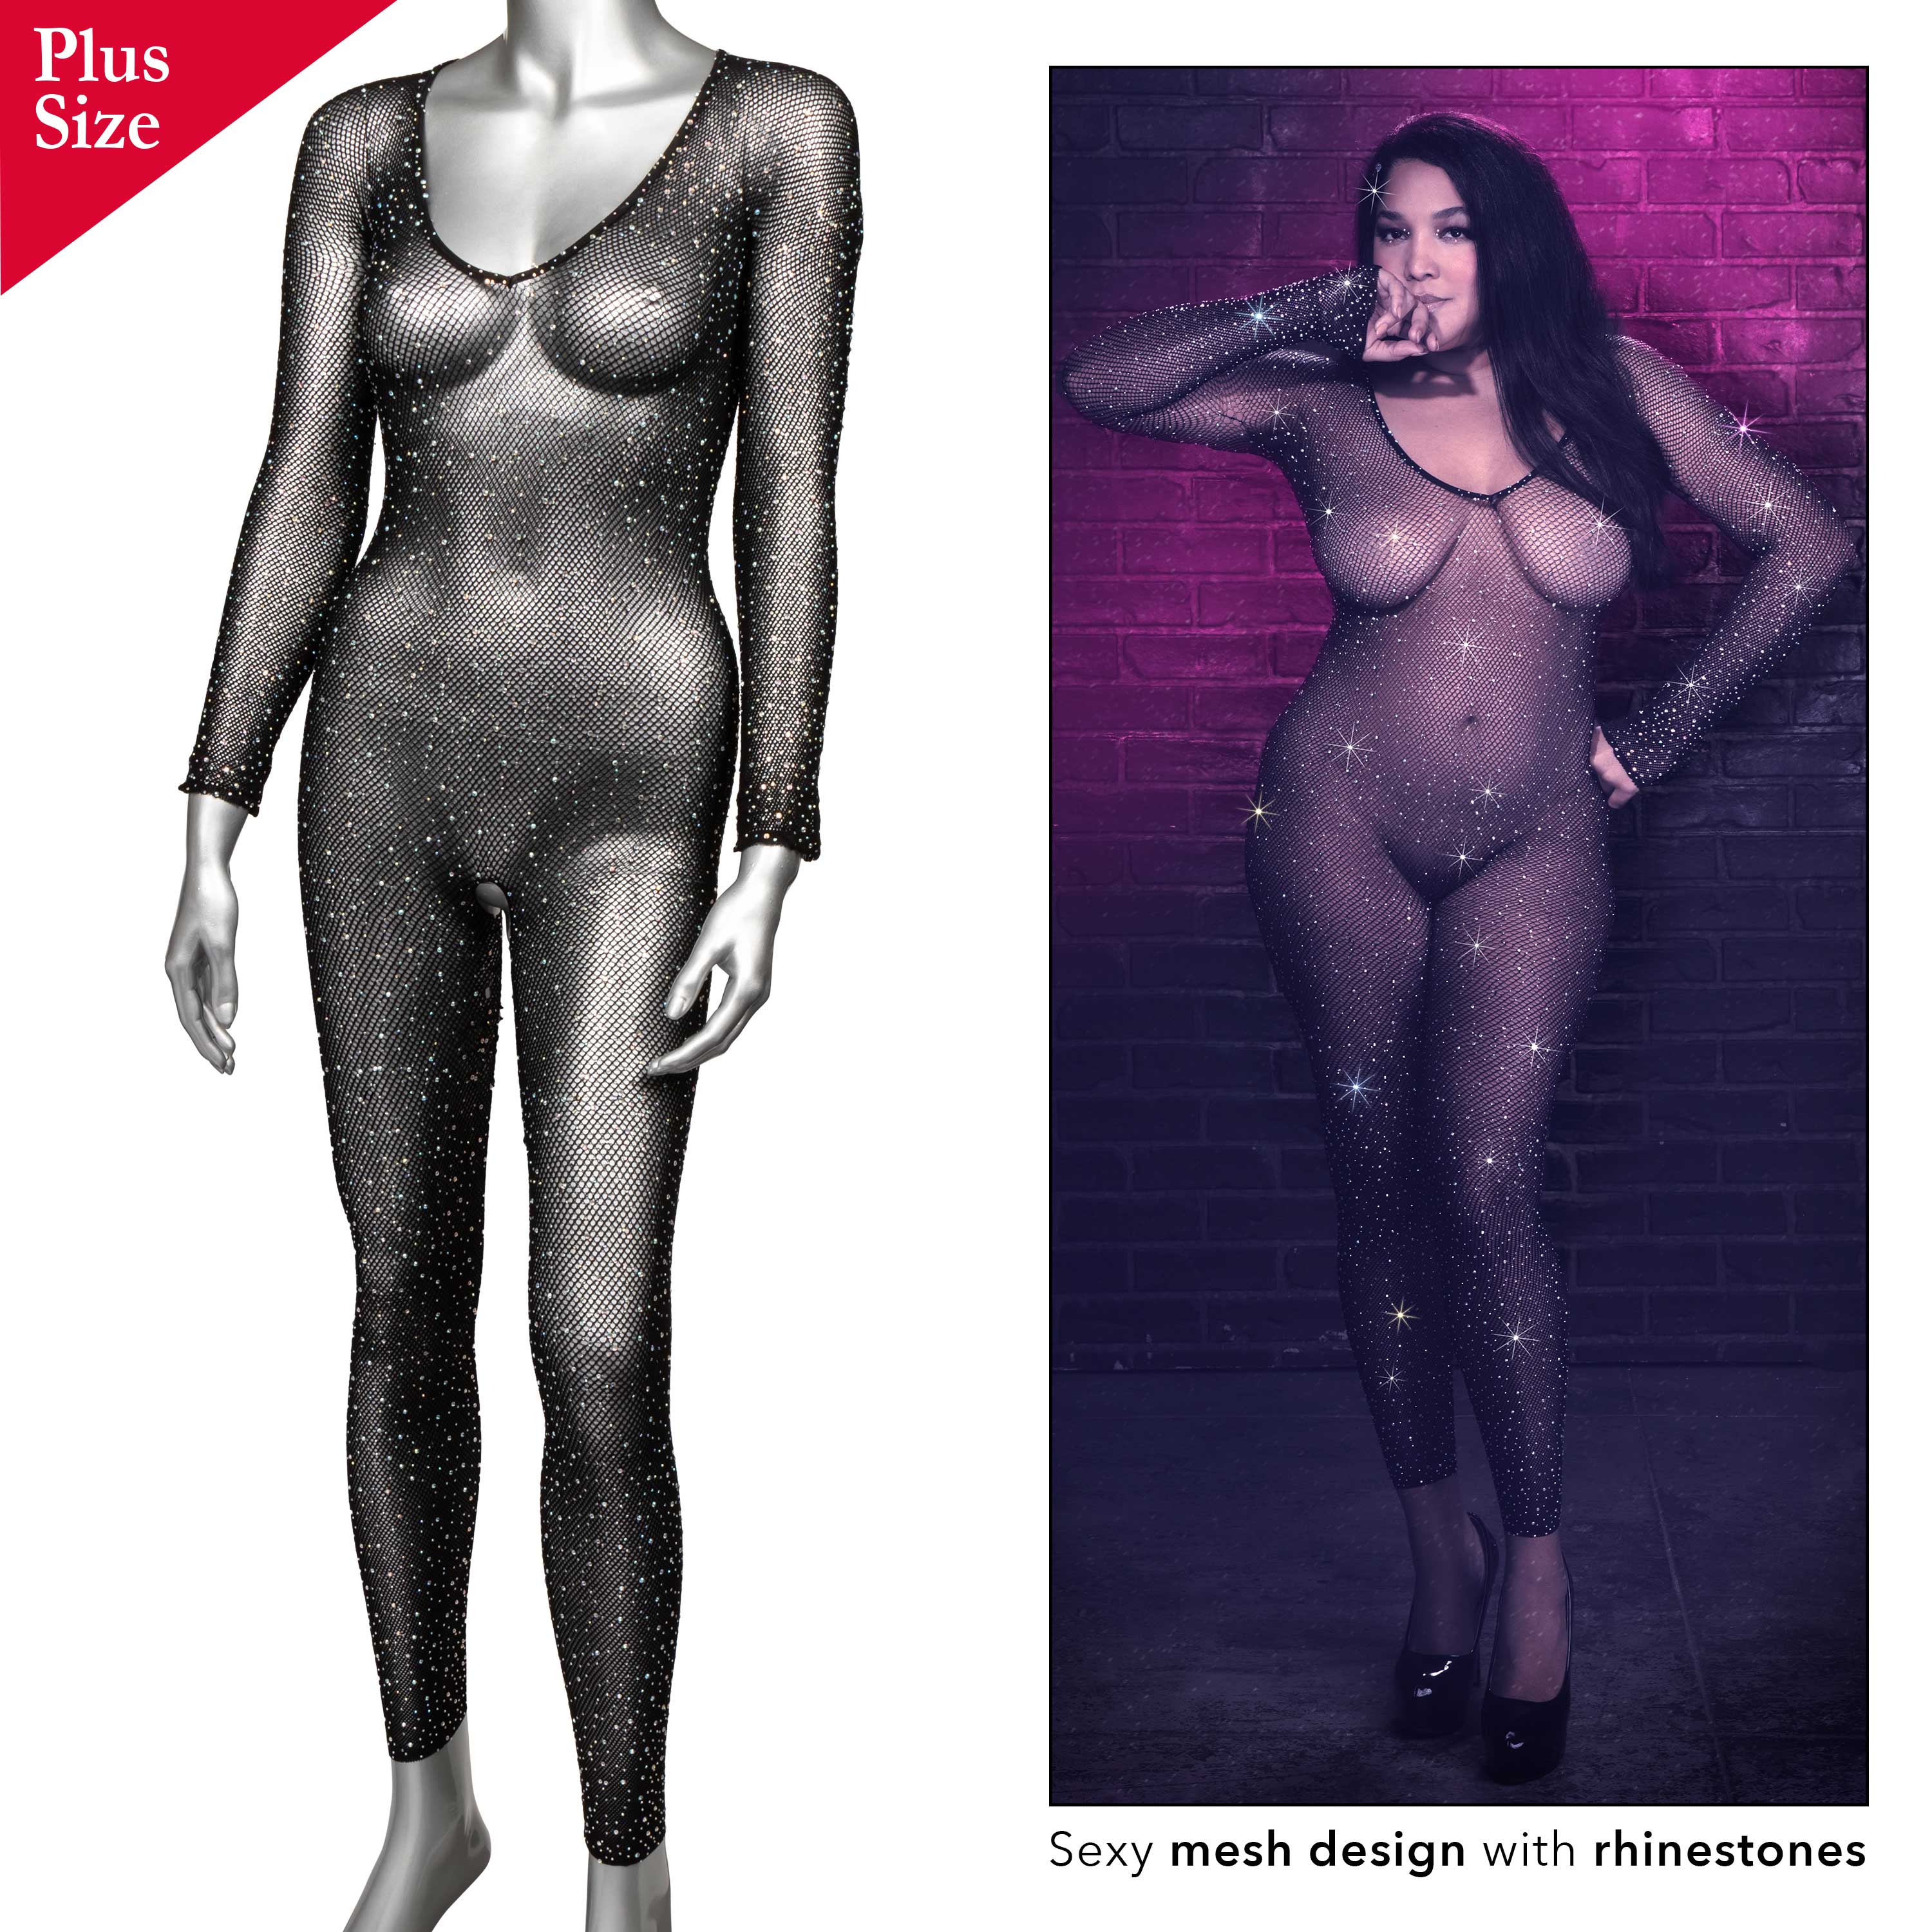 Radiance Crotchless Full Body Suit - Queen - Black-3